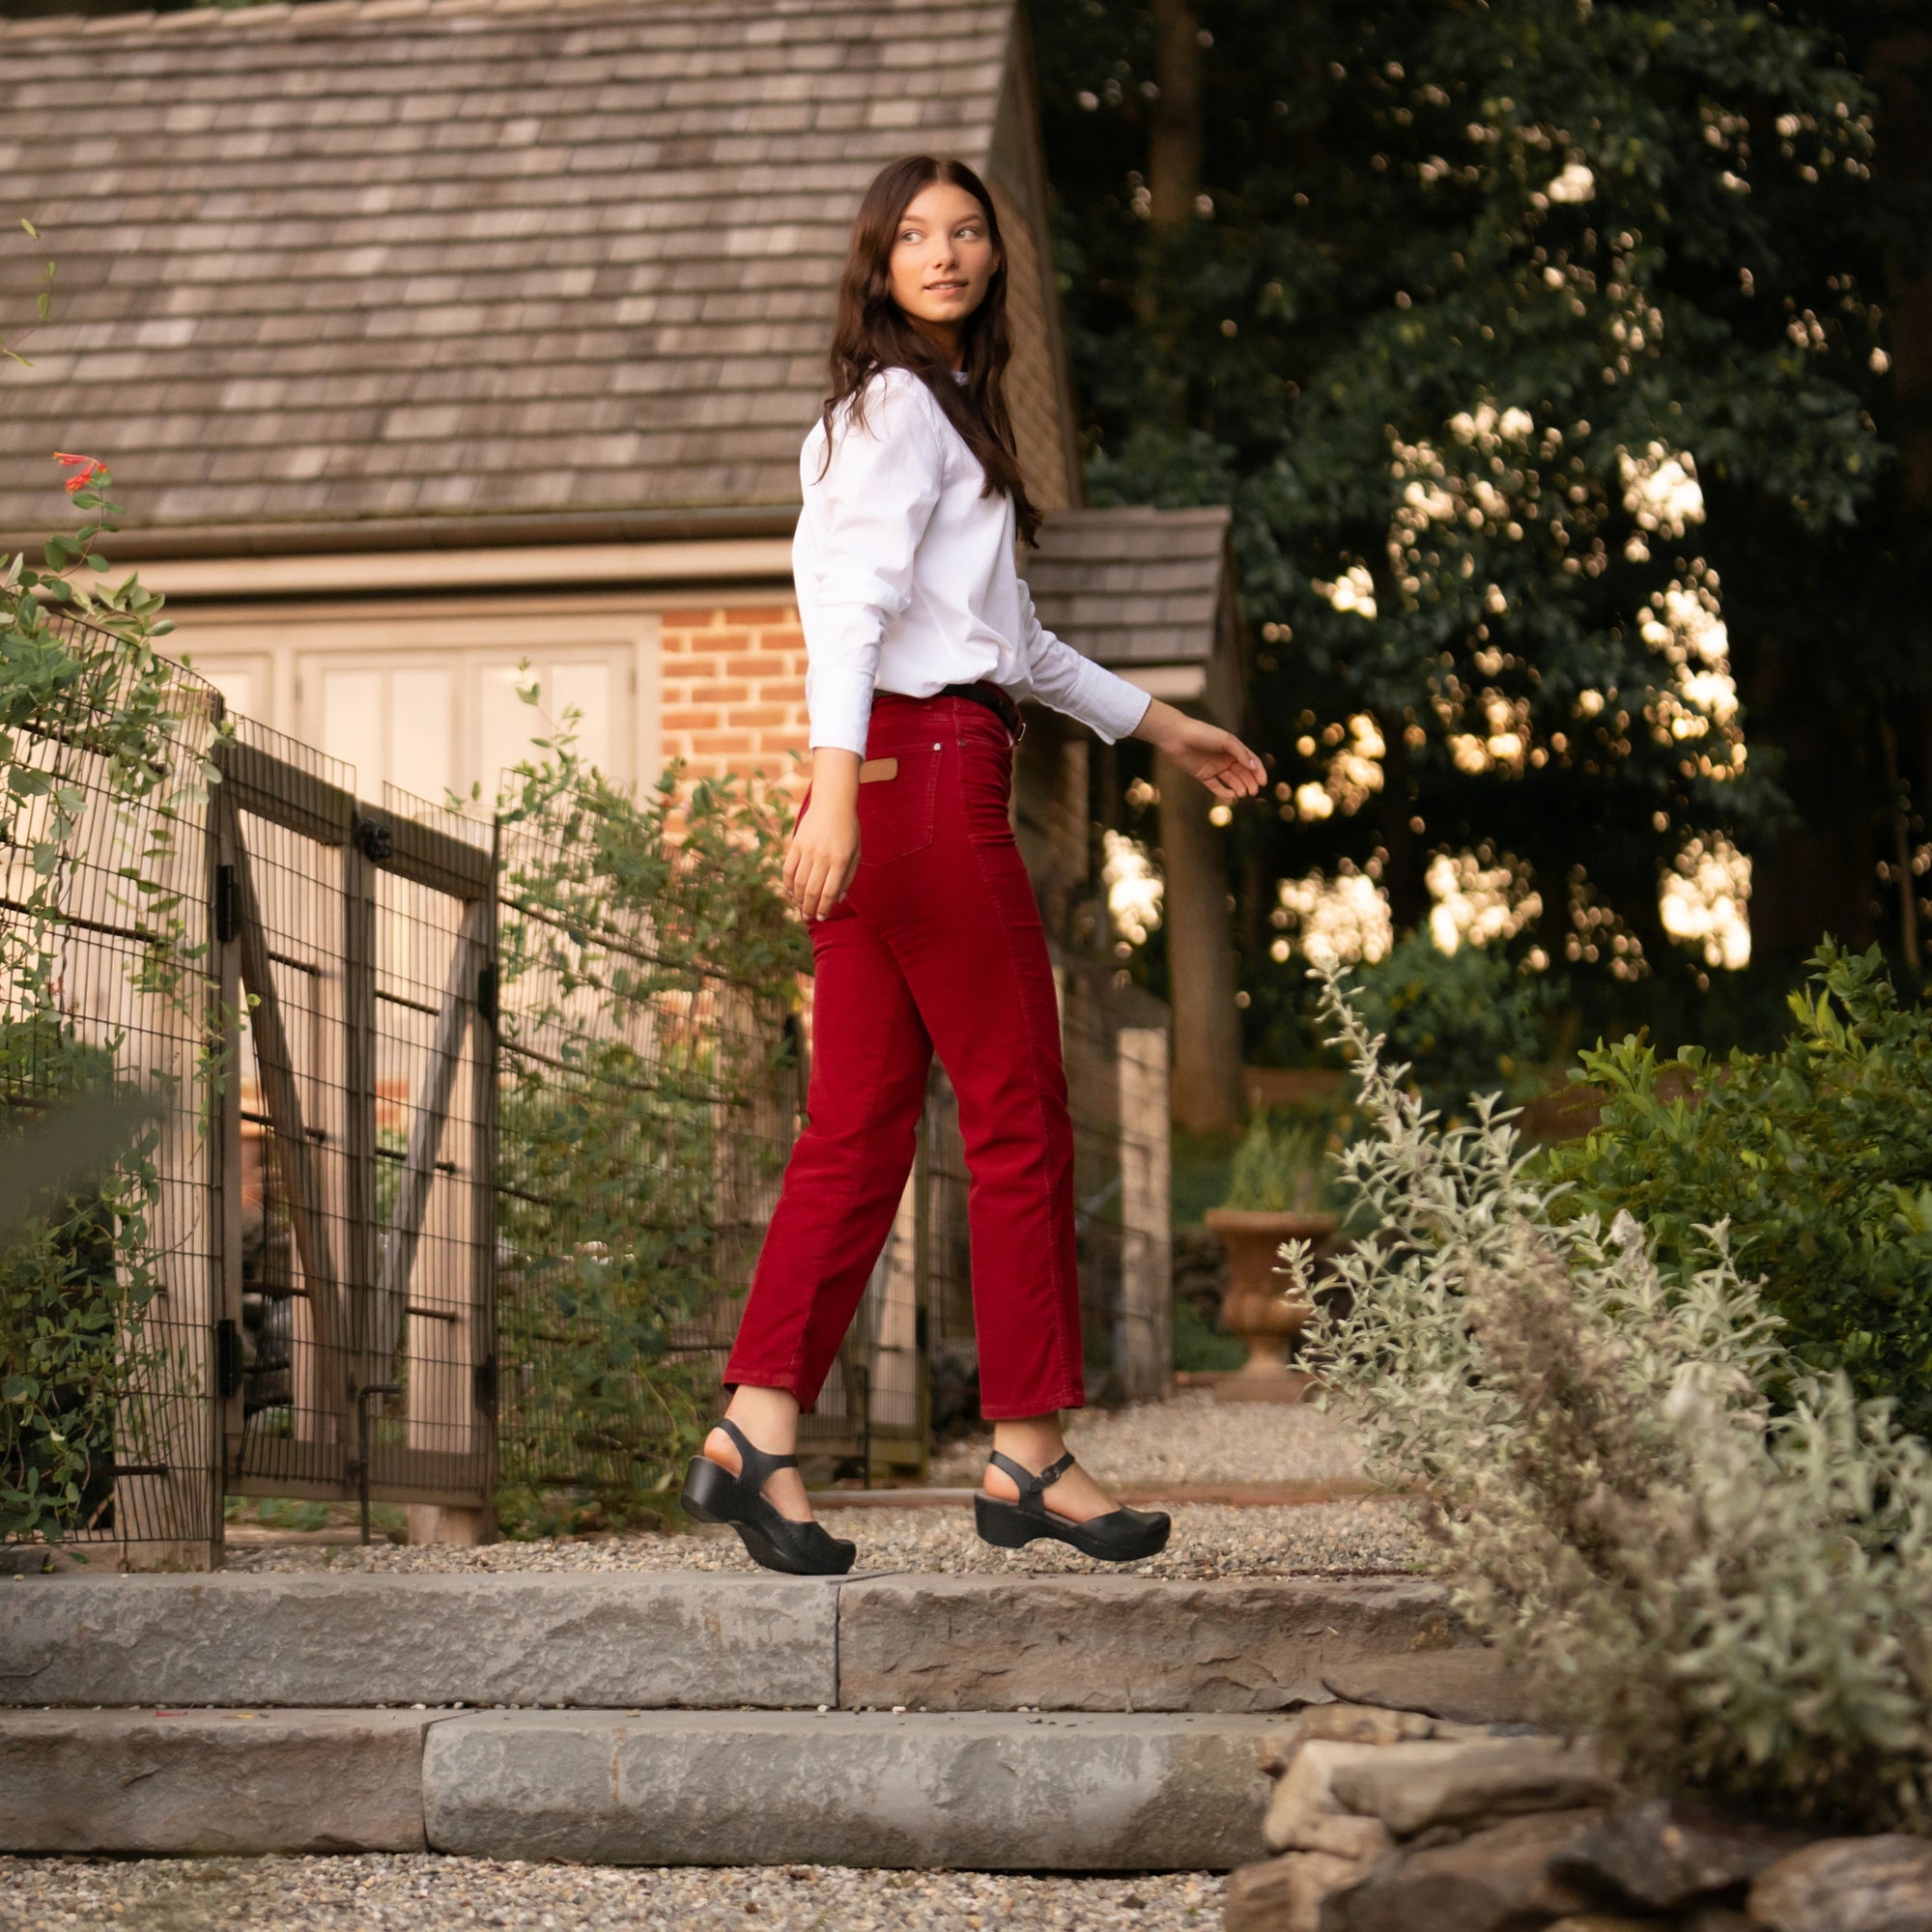 A woman in stylish red jeans wearing black flatform sandals.